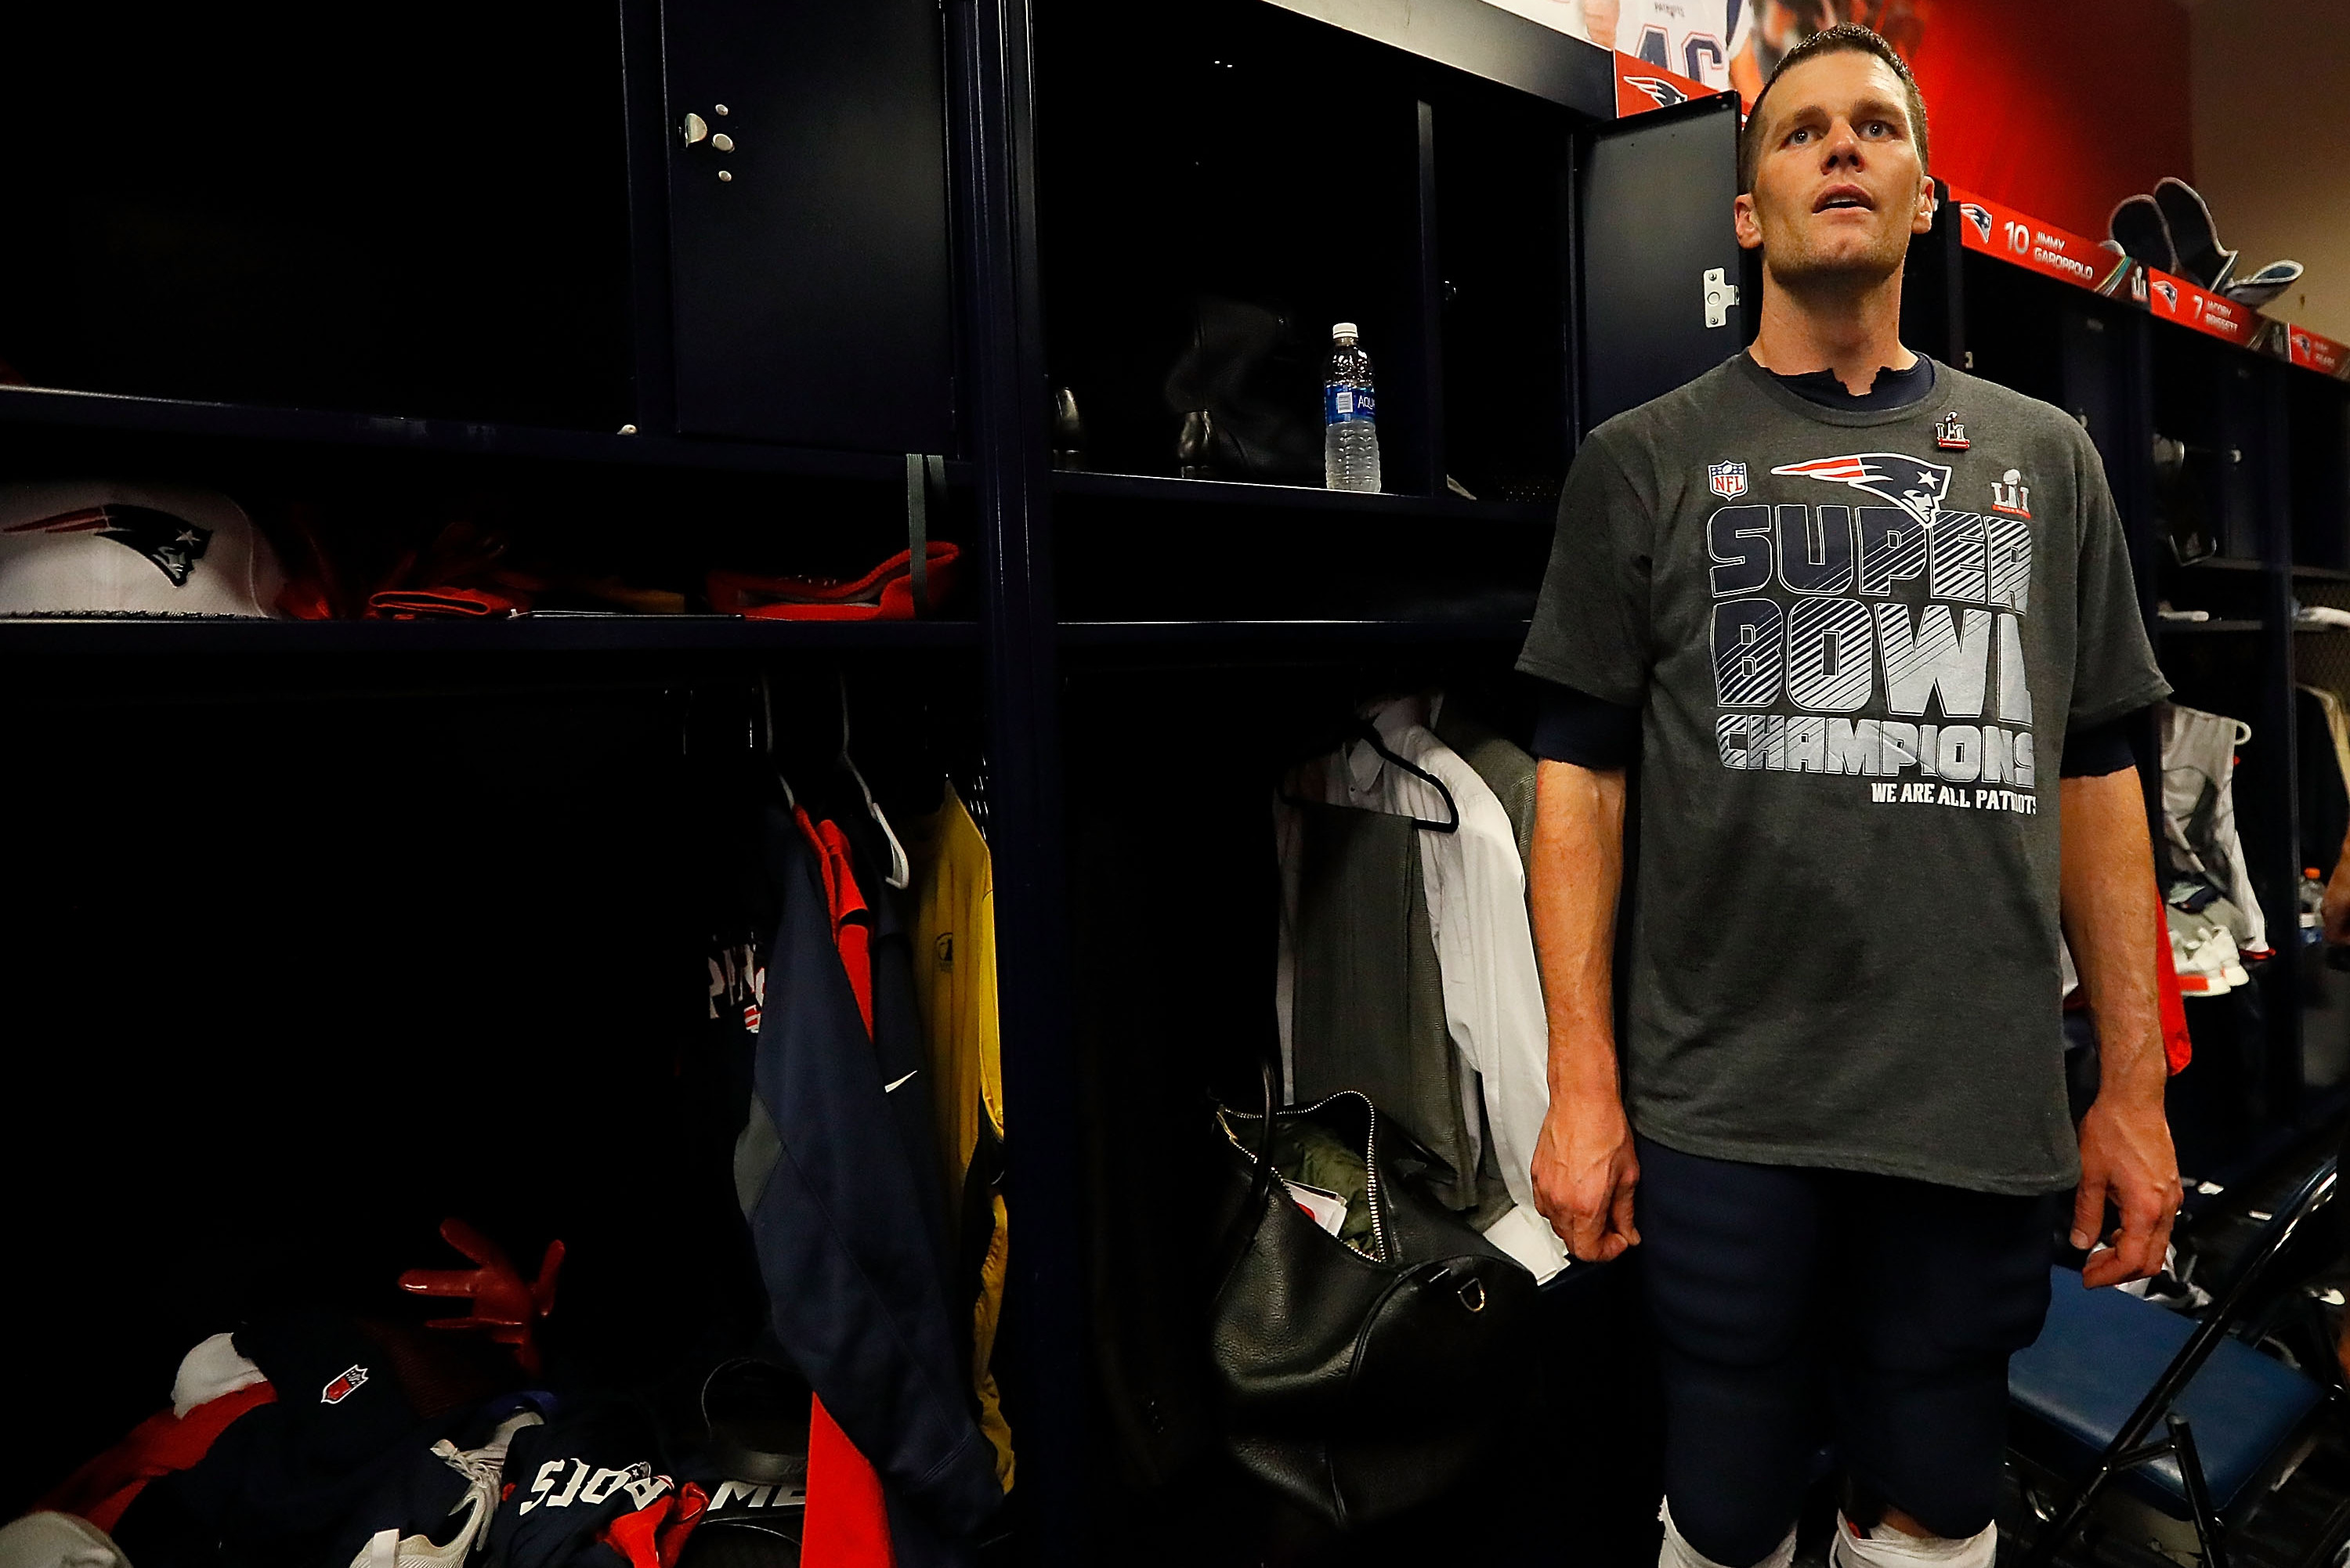 Tom Brady's Missing Super Bowl Jersey Could Be Worth $500,000 - Bloomberg